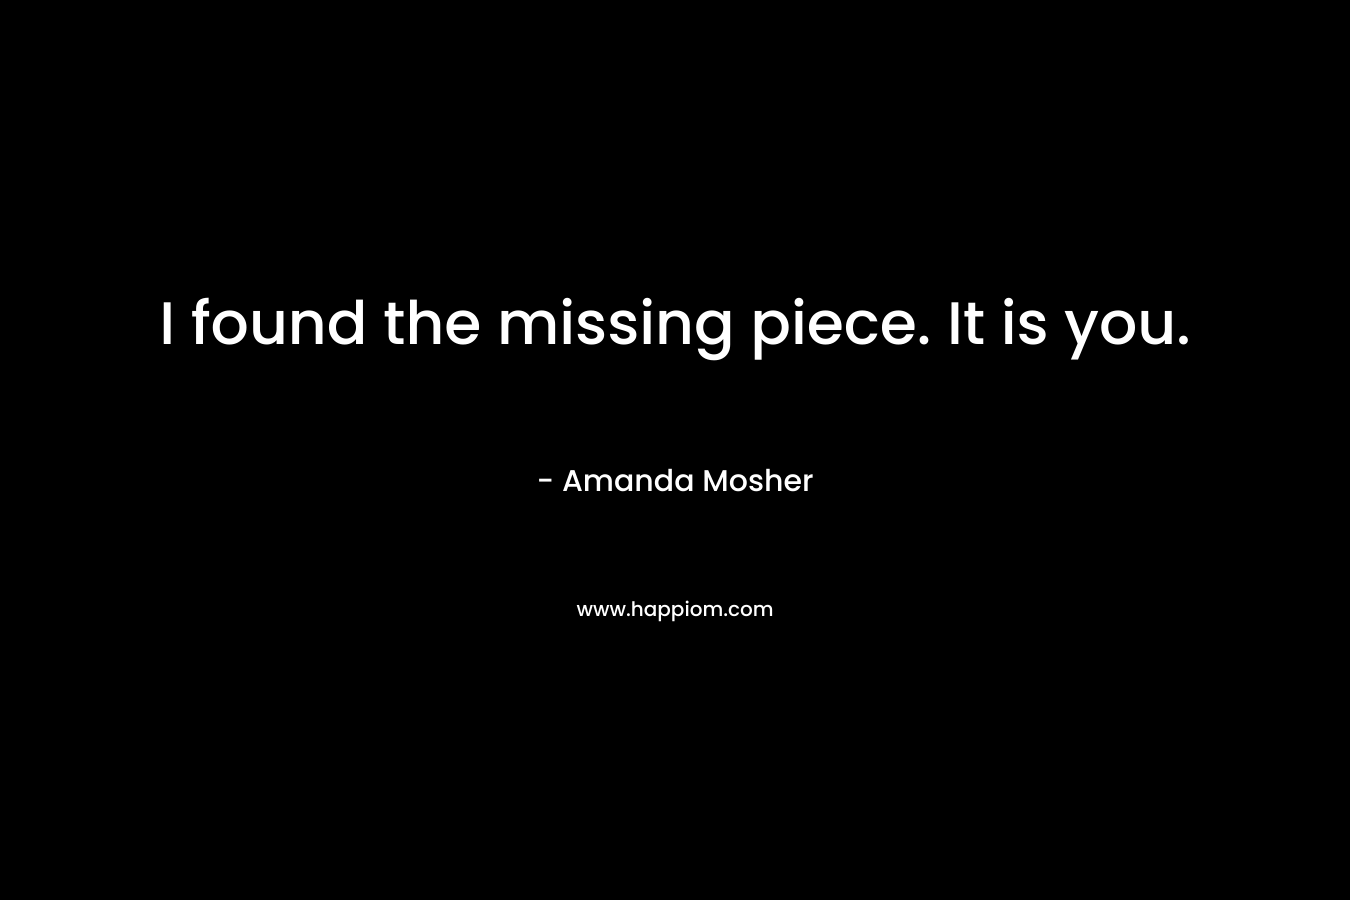 I found the missing piece. It is you. – Amanda Mosher